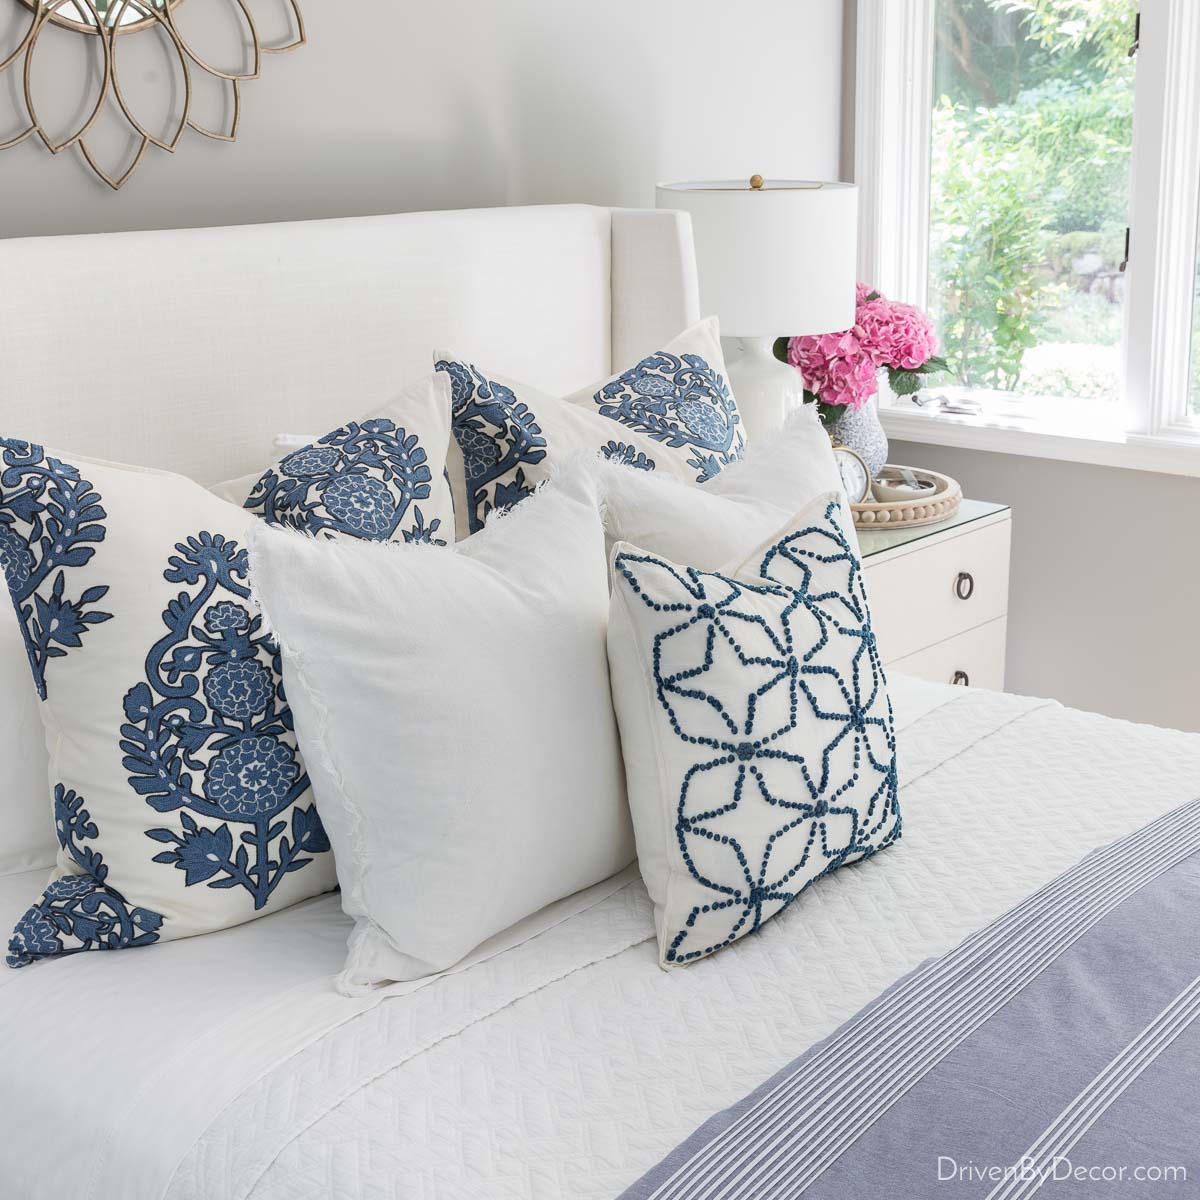 Bed Making 101: How to Layer a Bed for a Designer Look! - Driven